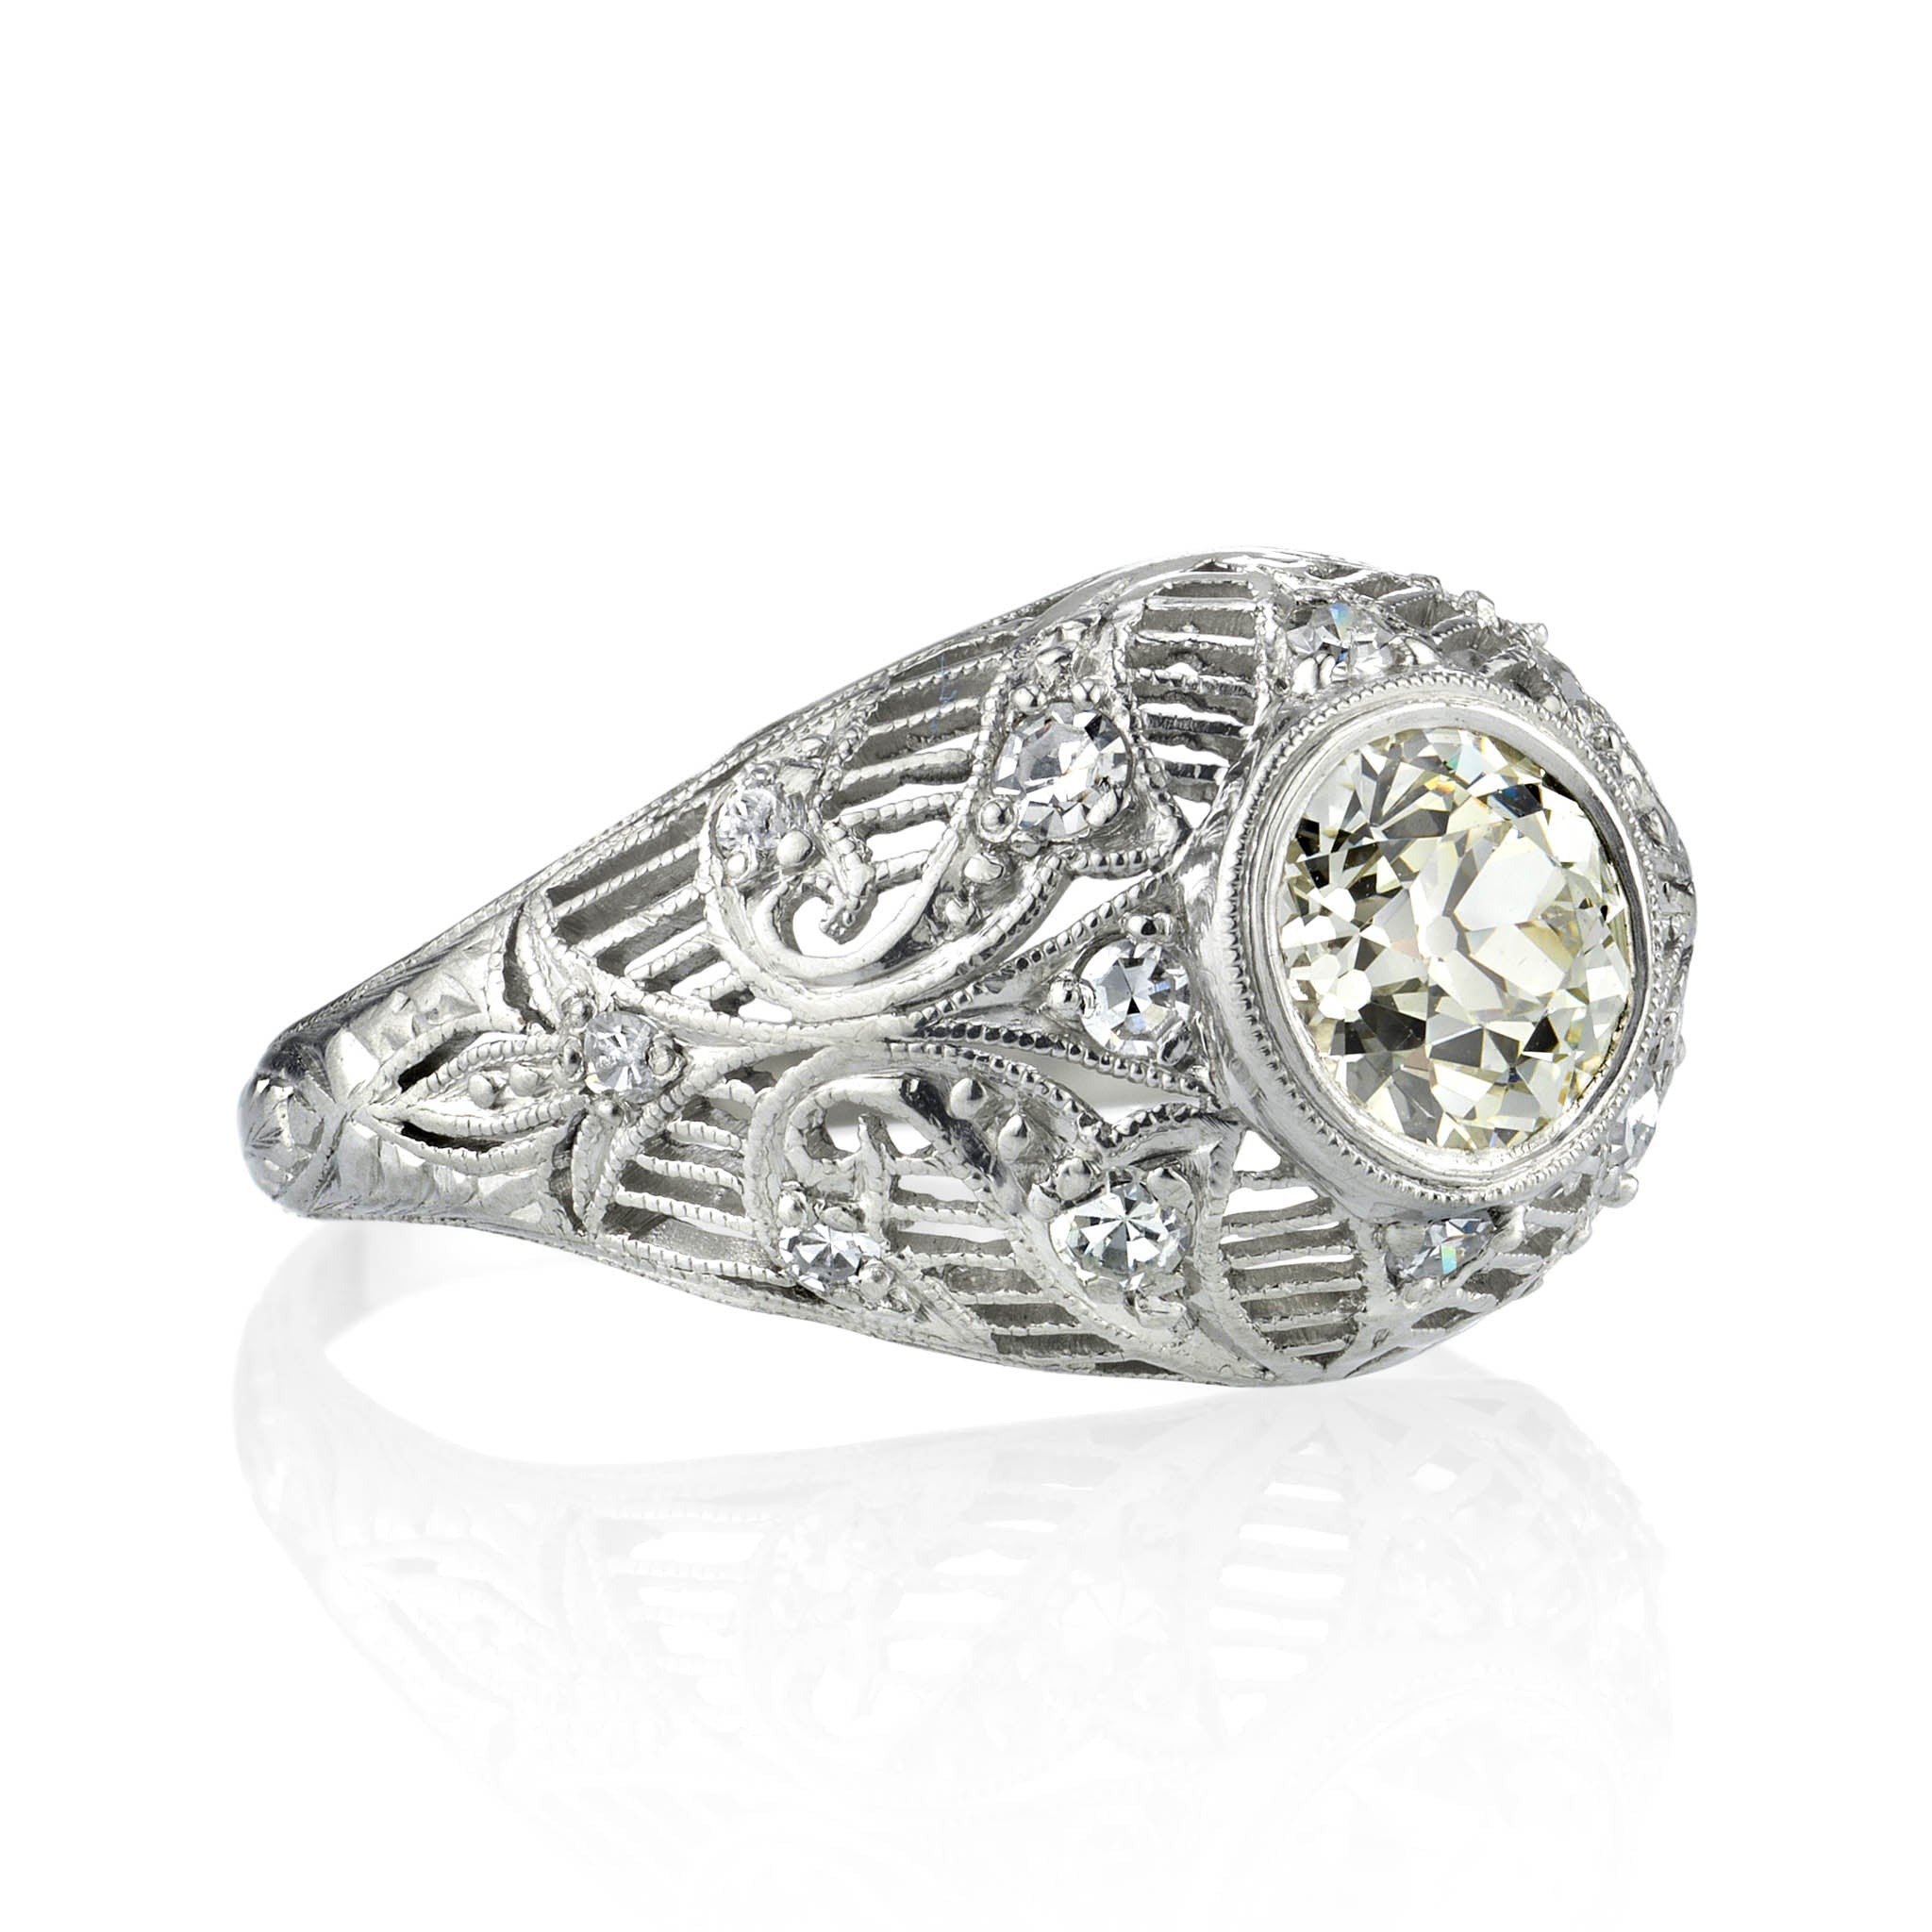 Filigree Engagement Rings: The Buyer's Guide